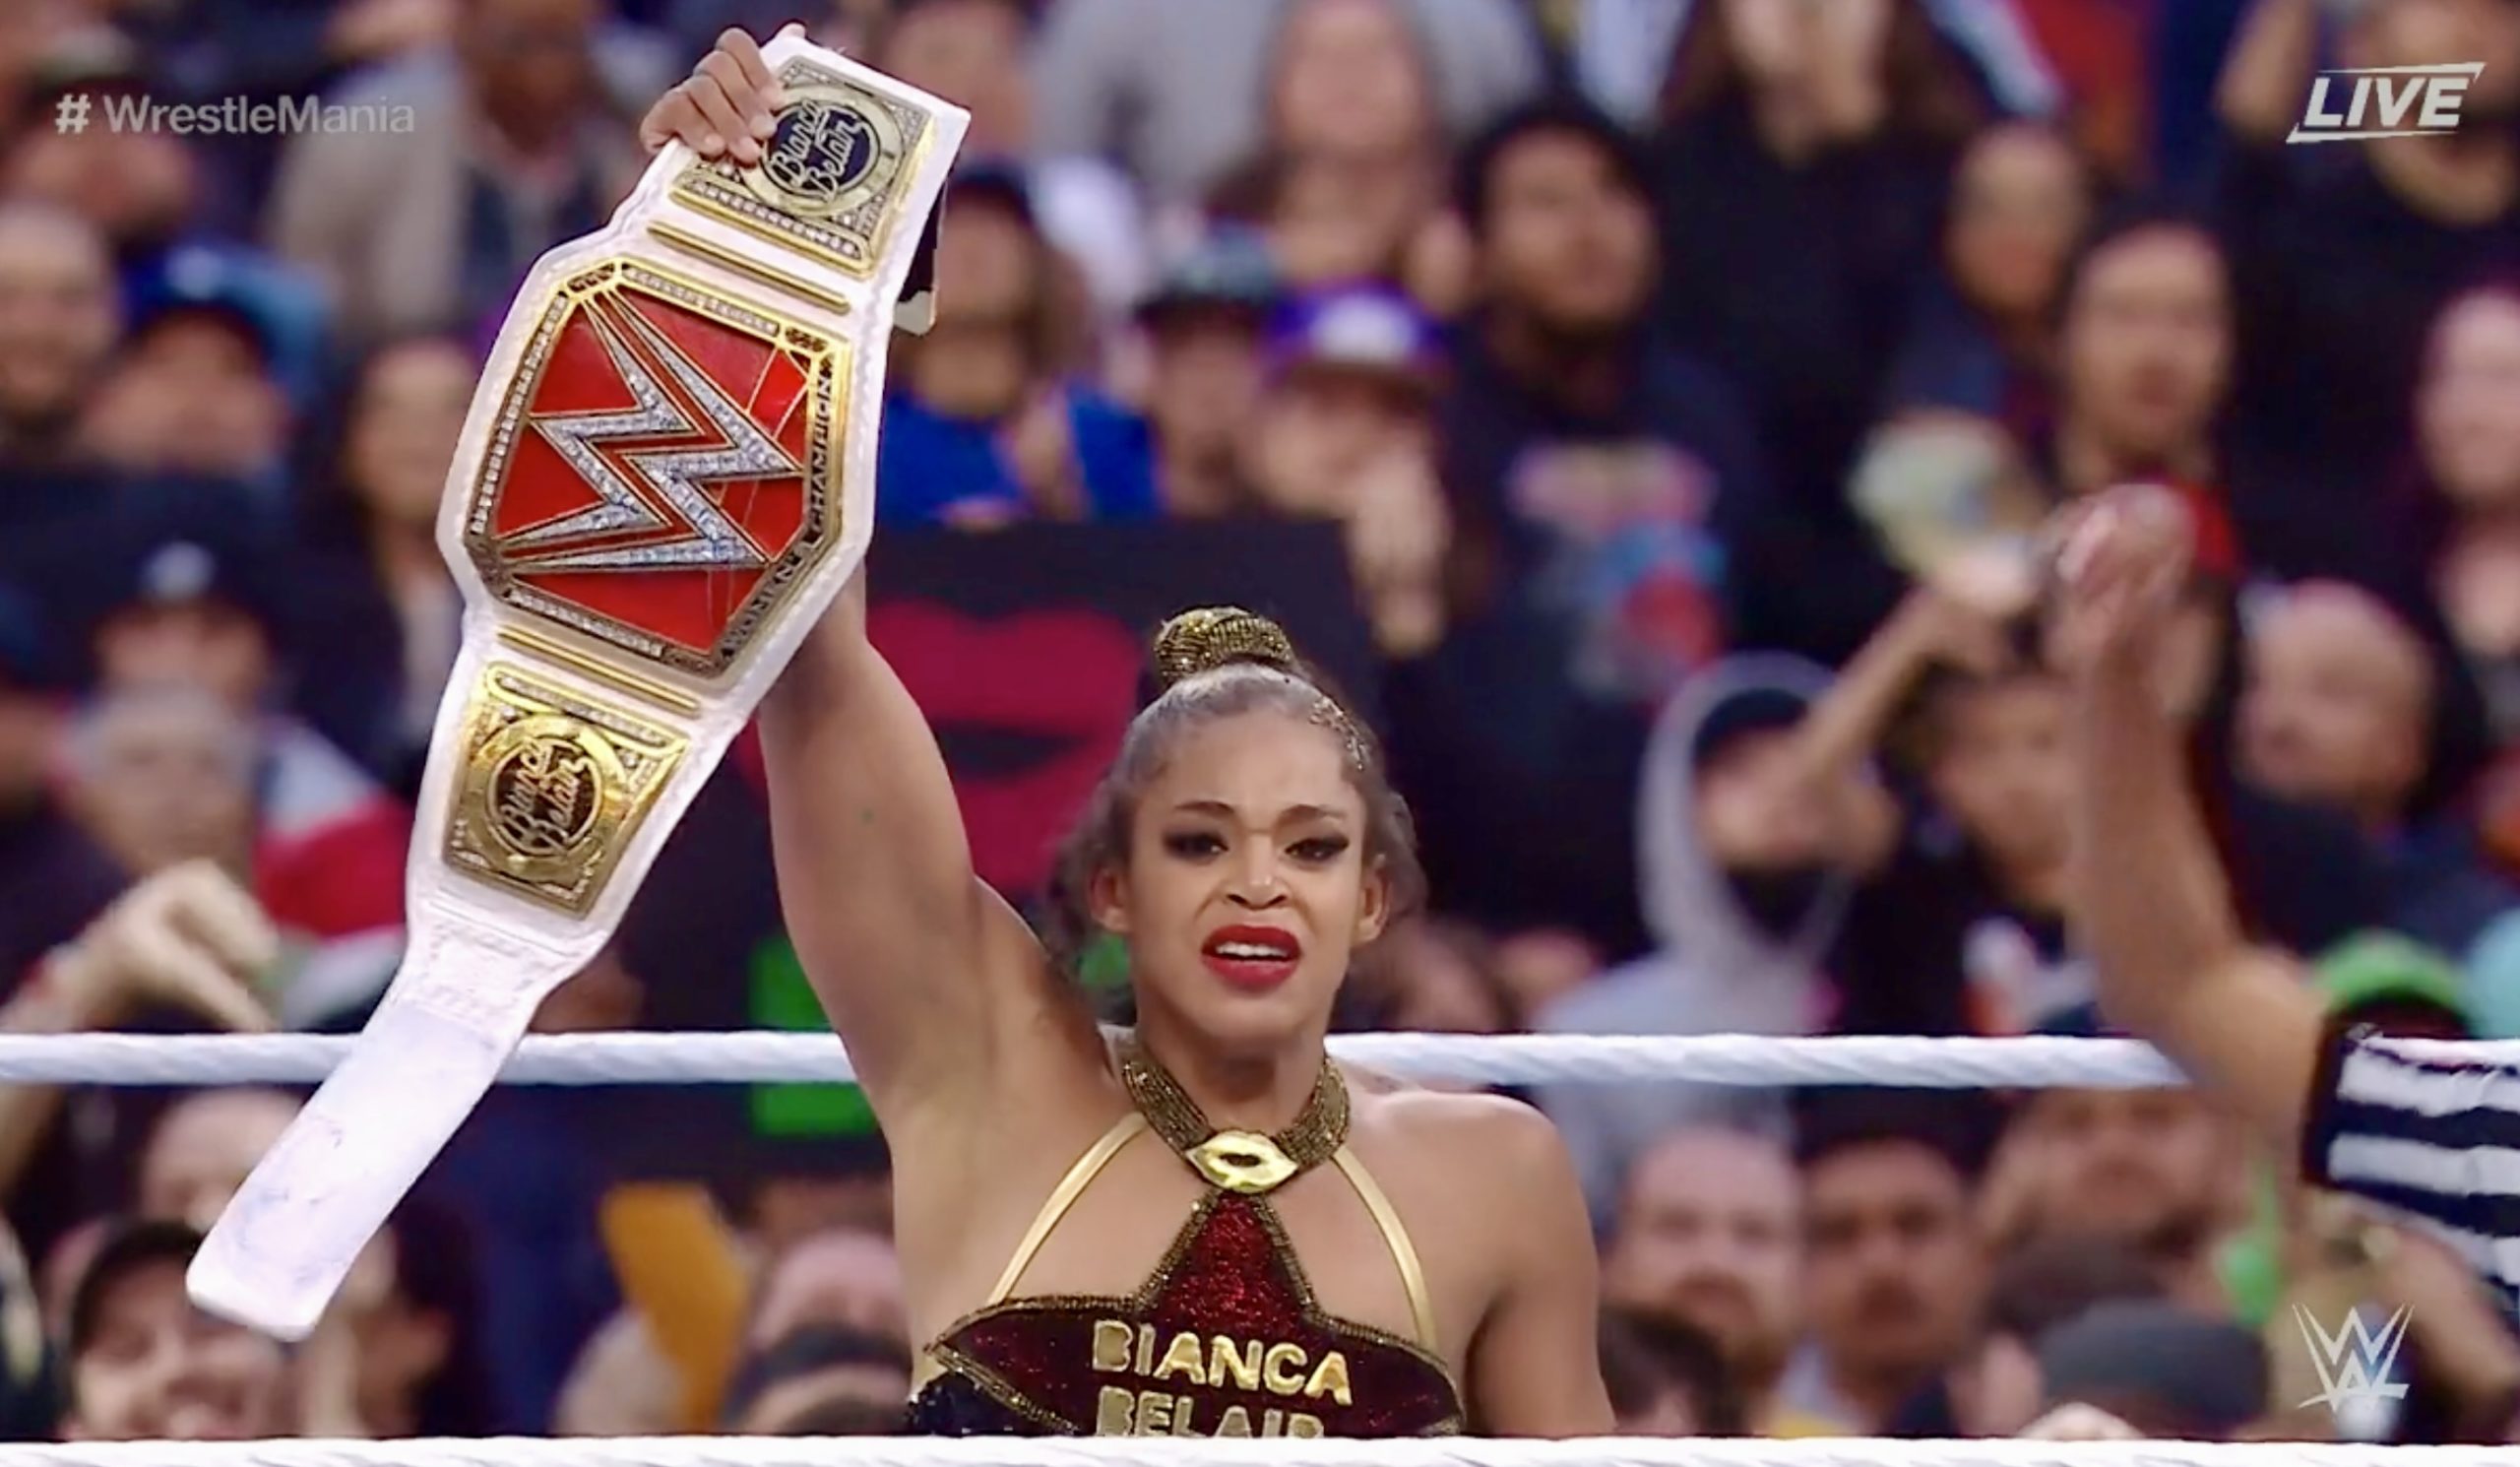 Bianca Belair retains Raw Women’s Championship, has held the title for a year